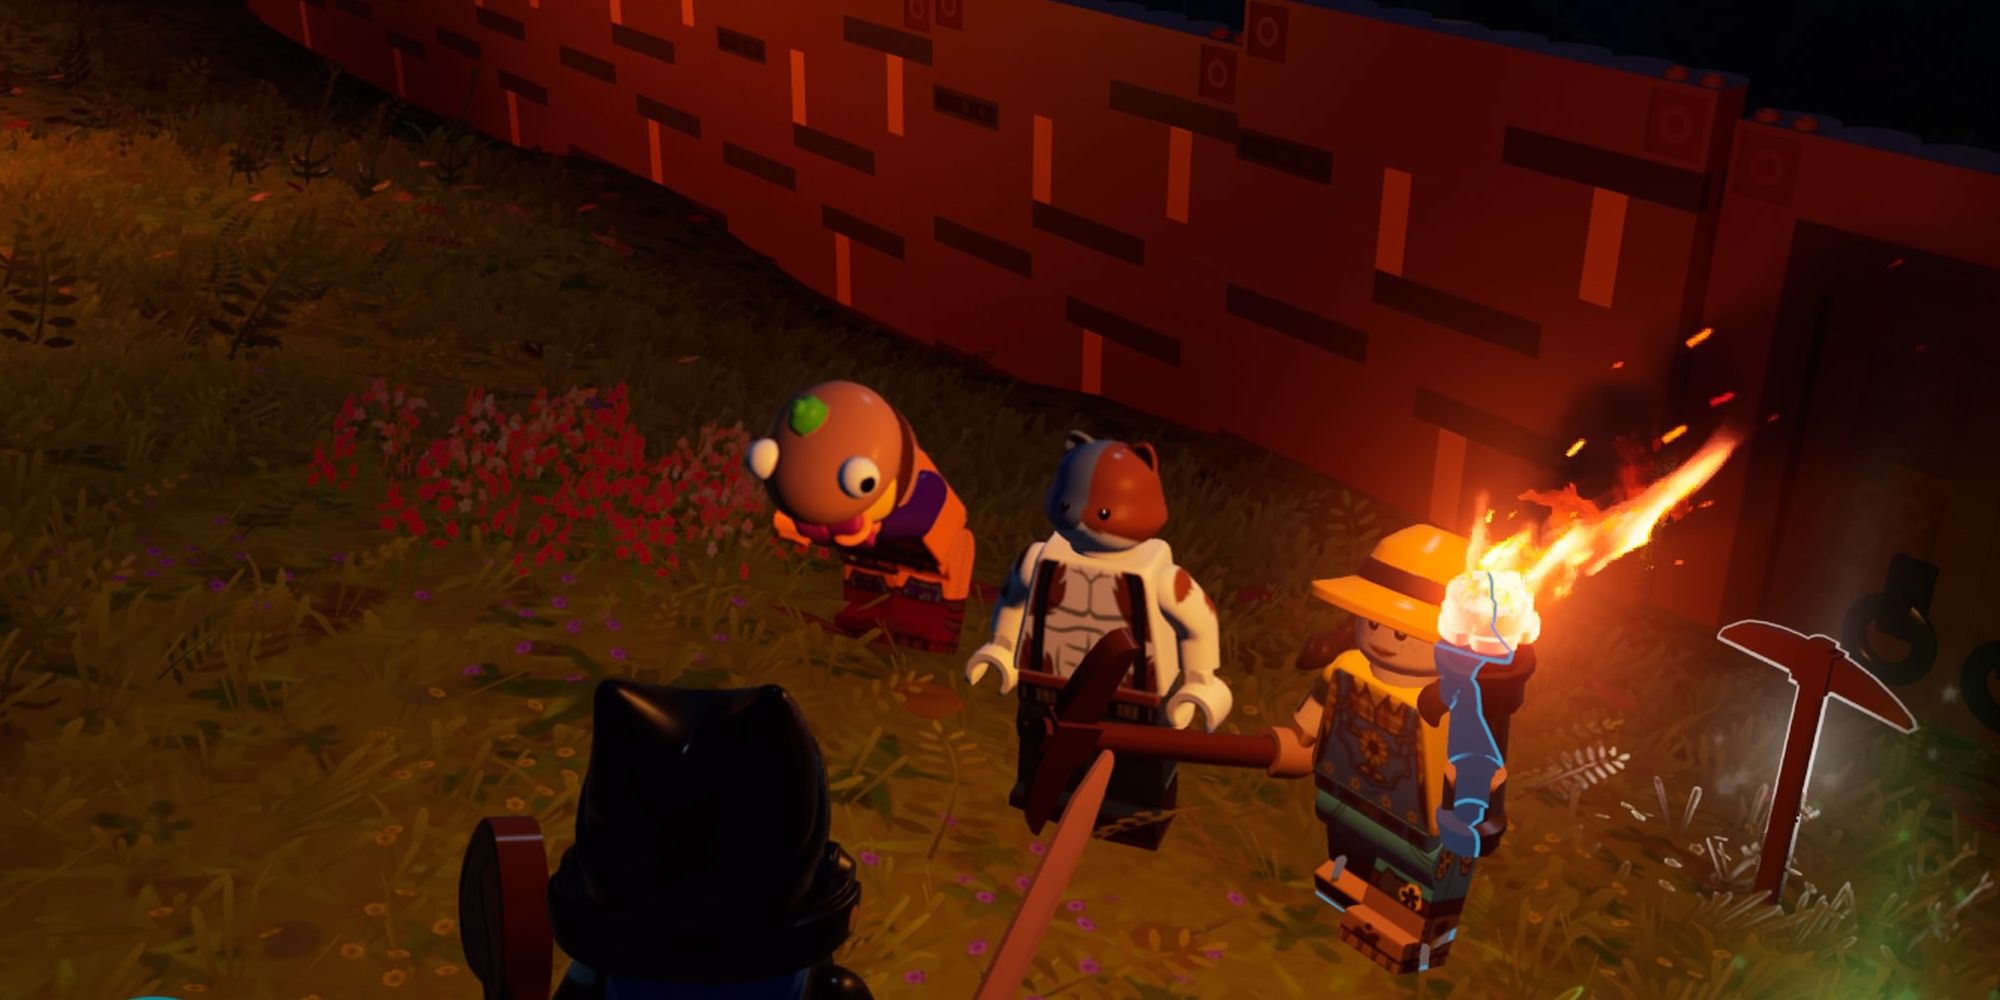 A player looking at three Fortnite characters in Lego Fortnite.